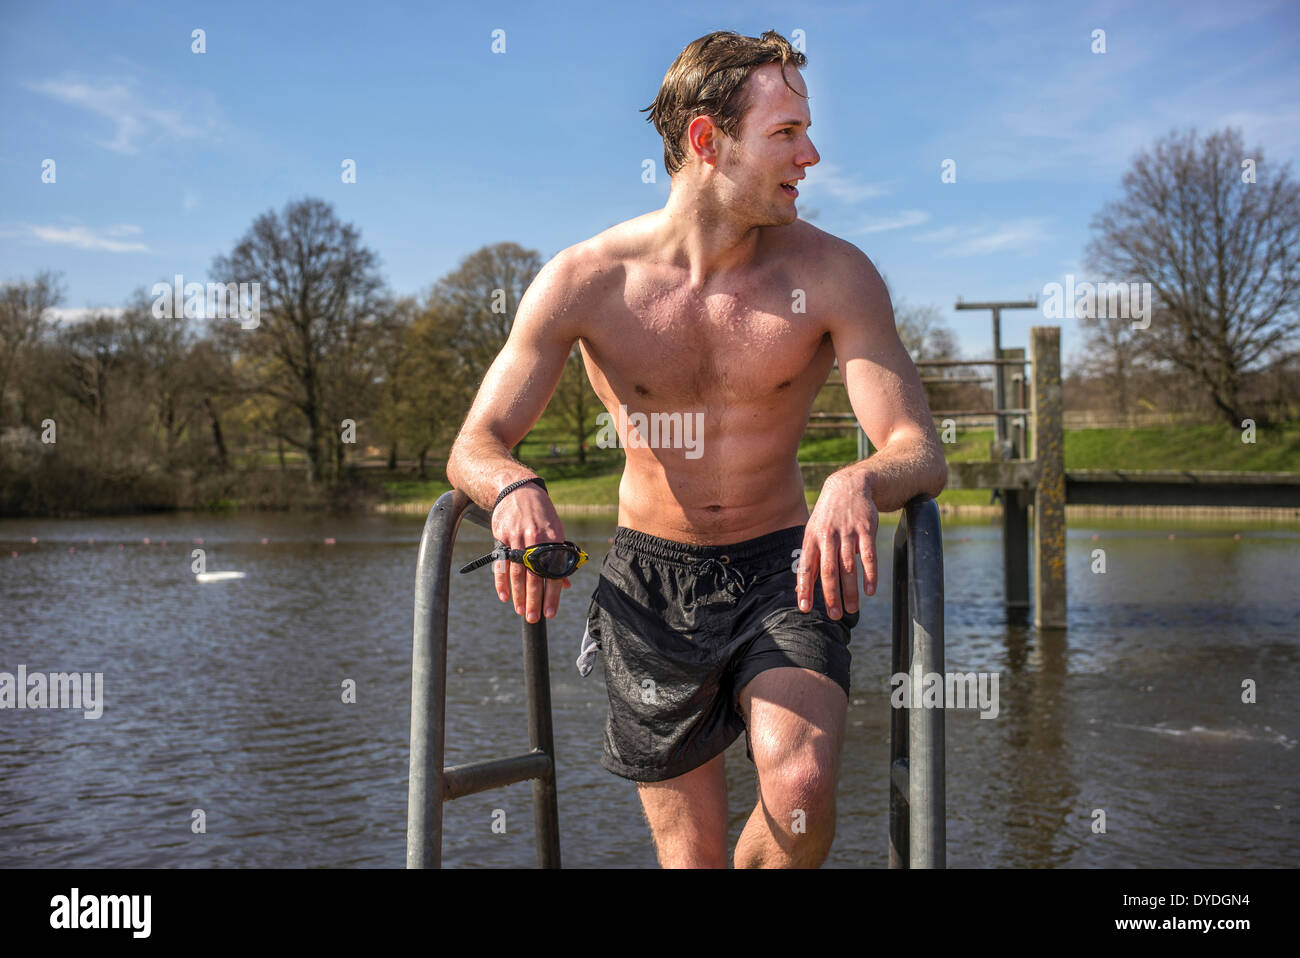 A young man in swimming trunks next to spring fresh water ponds. Stock Photo